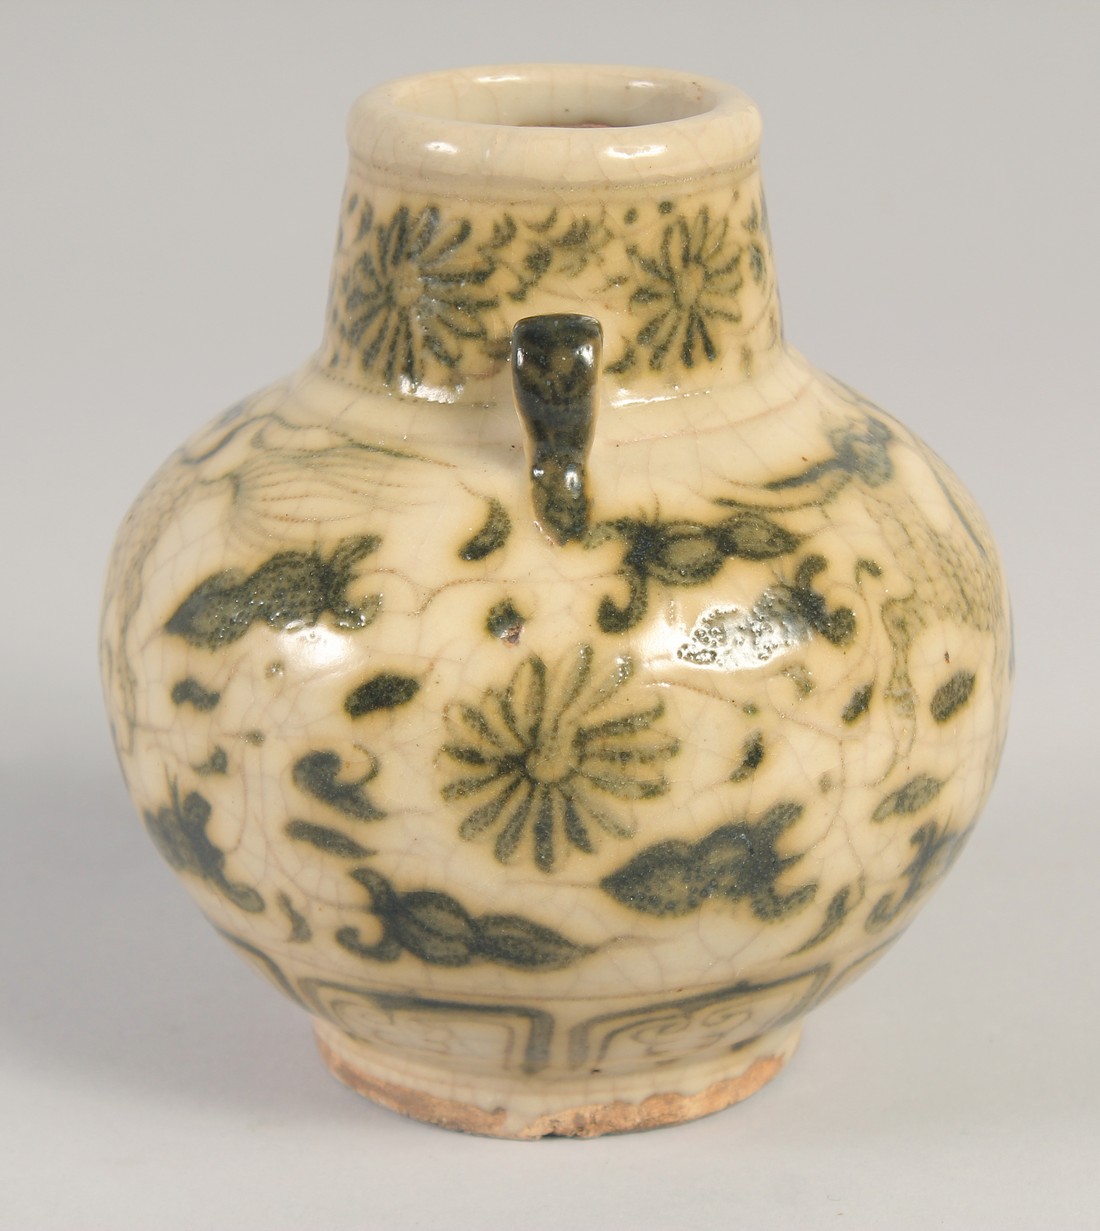 A THAI GLAZED POTTERY VASE, painted with beasts, 13.5cm high. - Image 4 of 6